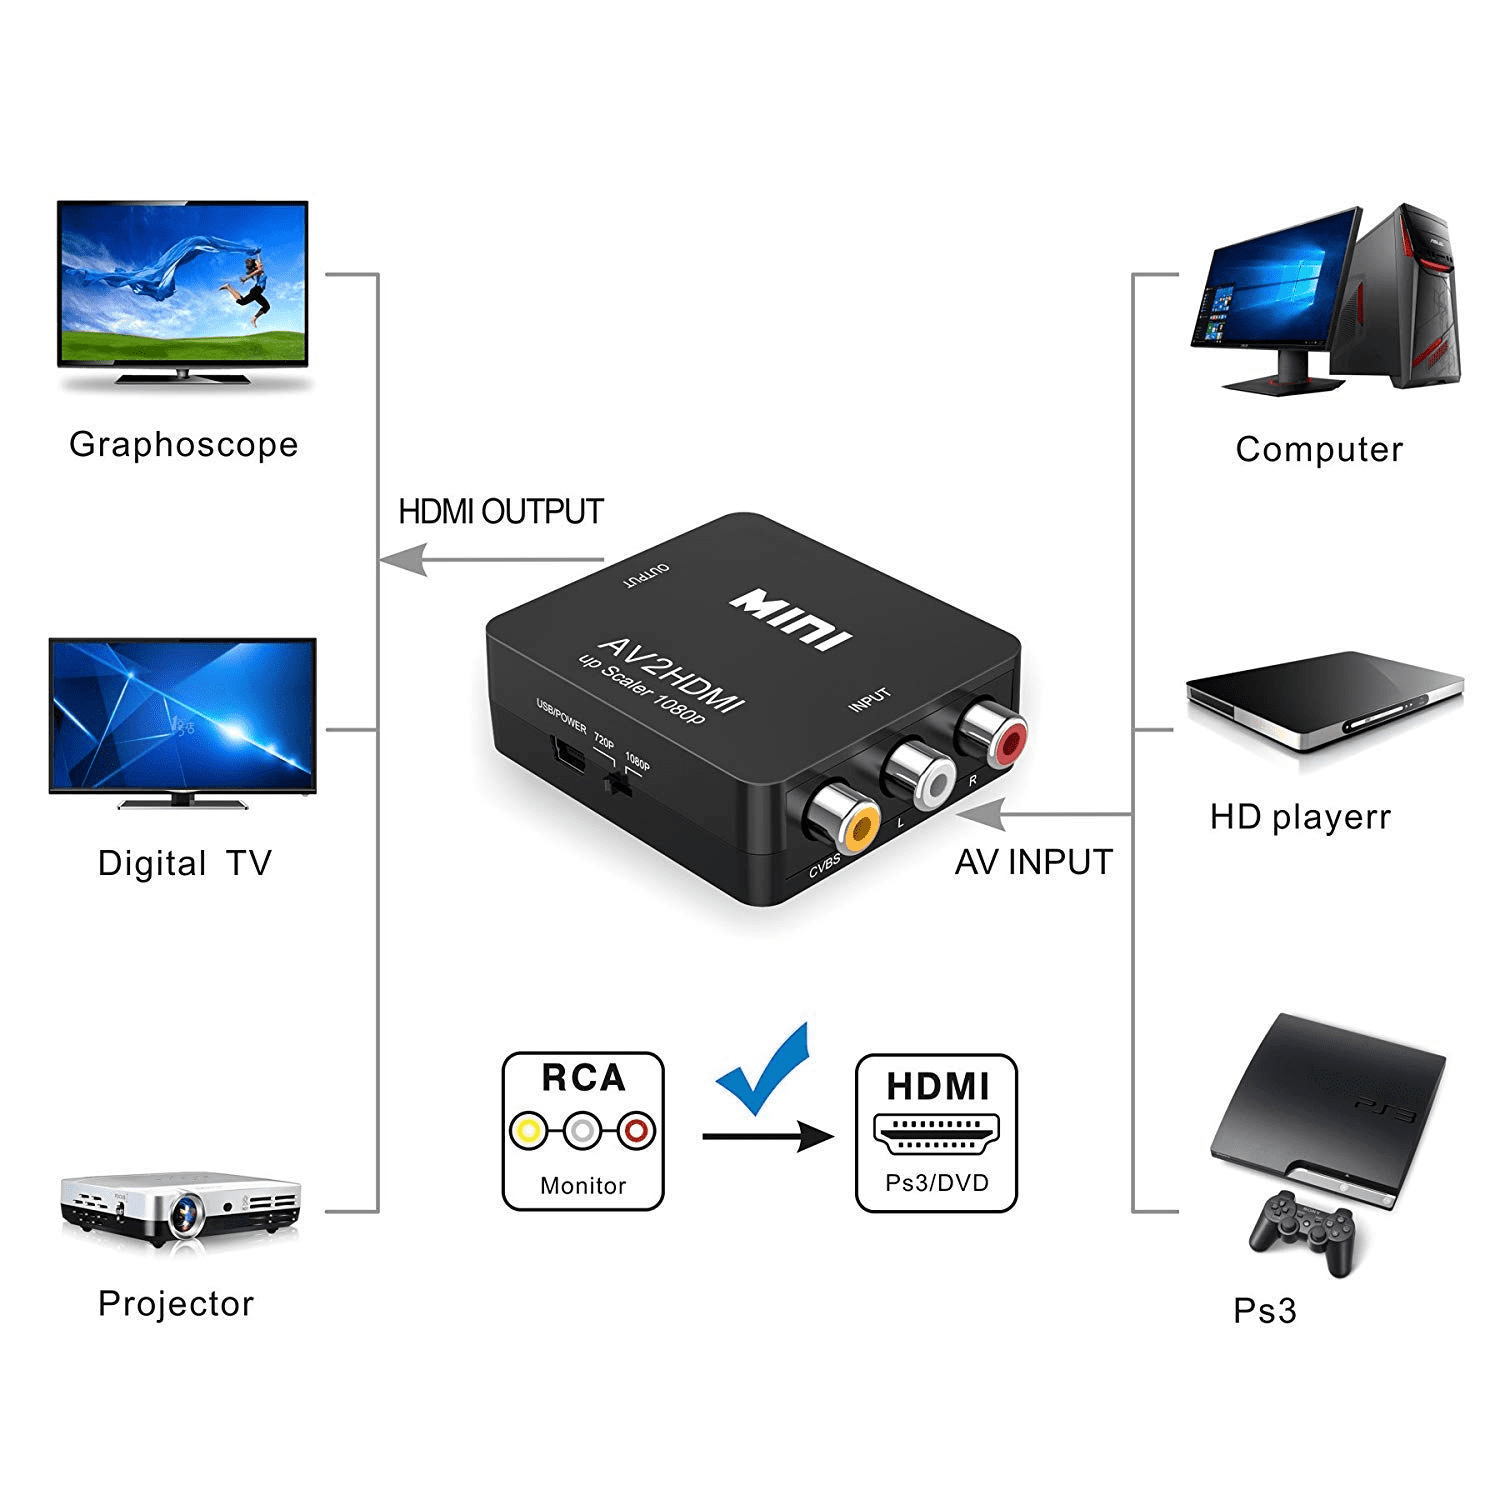 RCA to HDMI Converter, 1080P RCA Composite CVBS AV to HDMI Video Audio  Converter Adapter Compatible with N64 Wii PS2 Xbox VHS VCR Camera DVD,  Support PAL/NTSC with USB Power Cable 